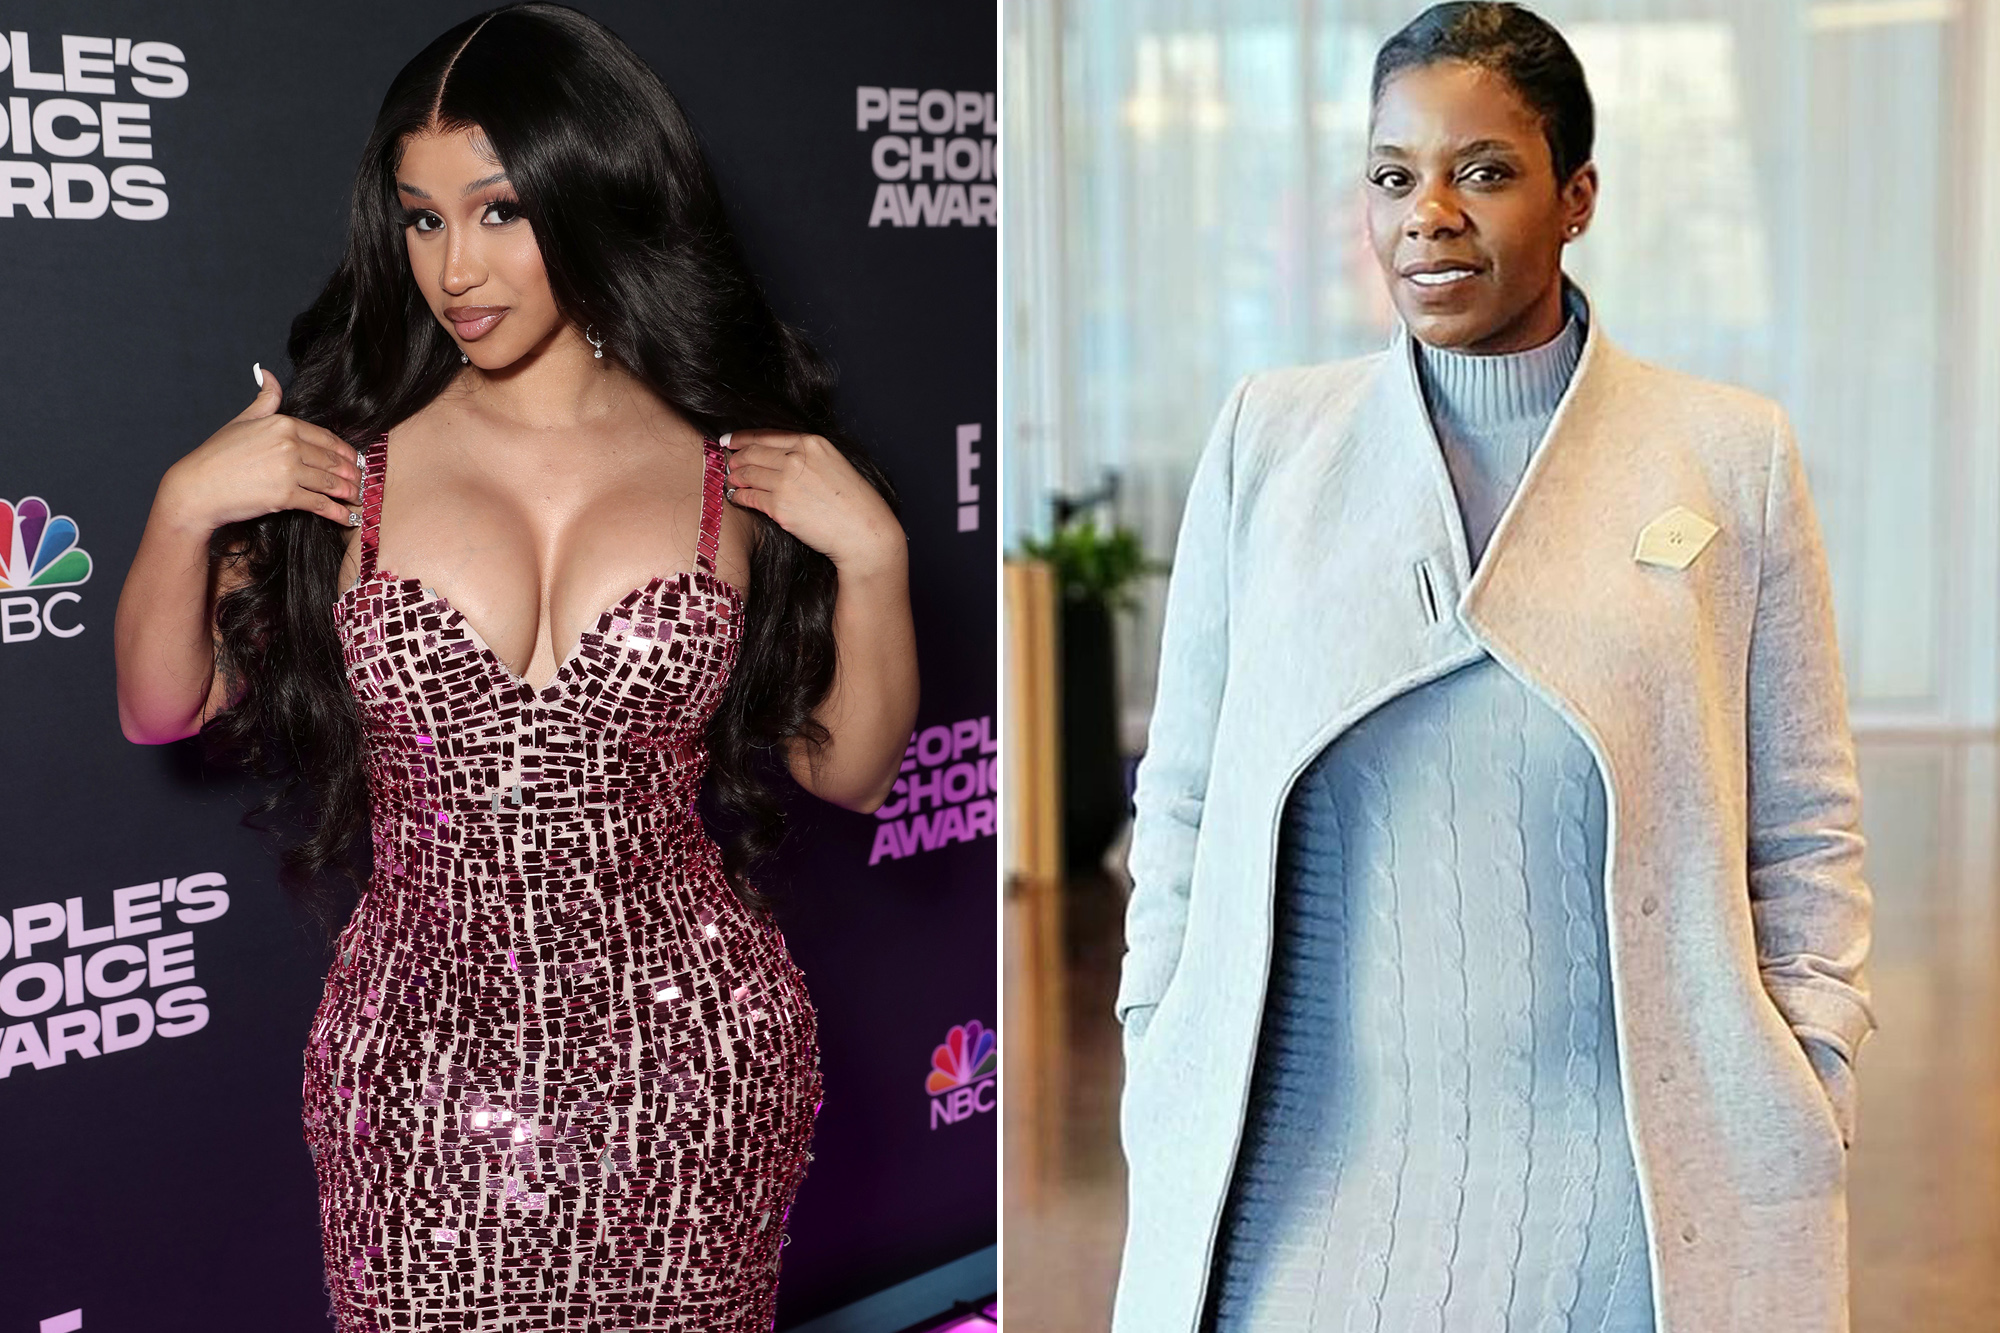 YouTuber Tasha K confirms she does not have $4M to pay Cardi B